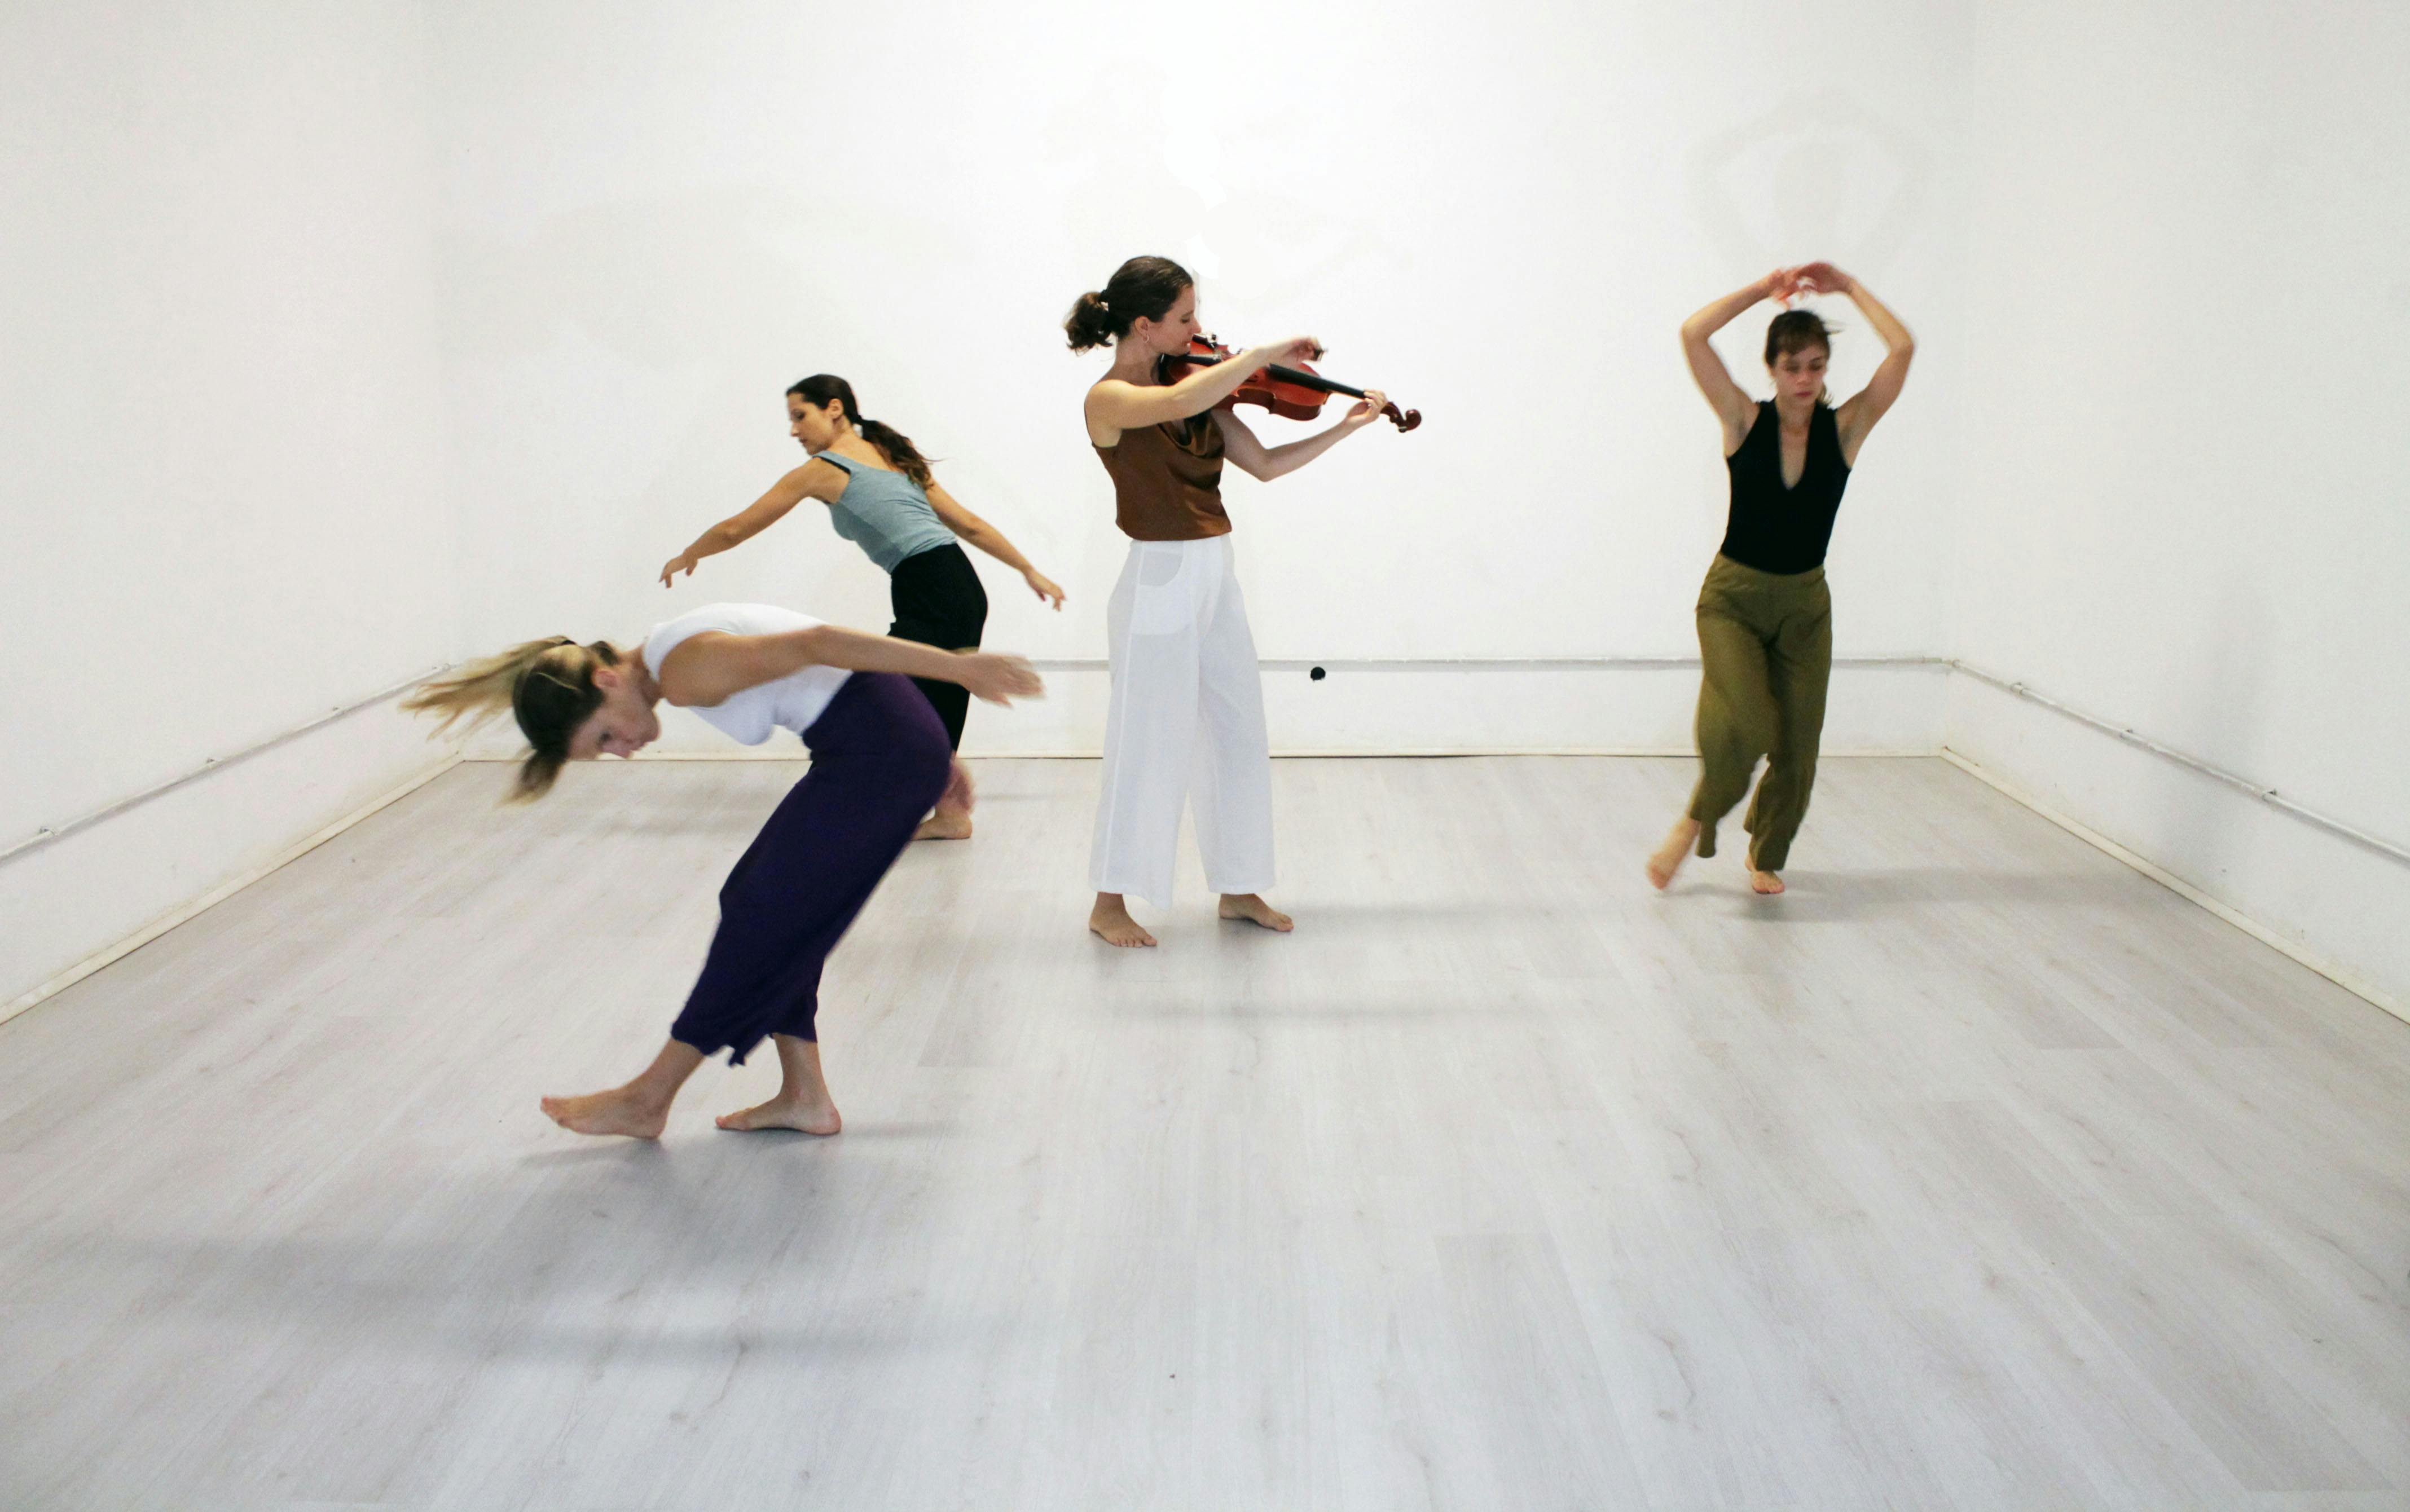 A violinist in the center of the room plays and three performers dance around her